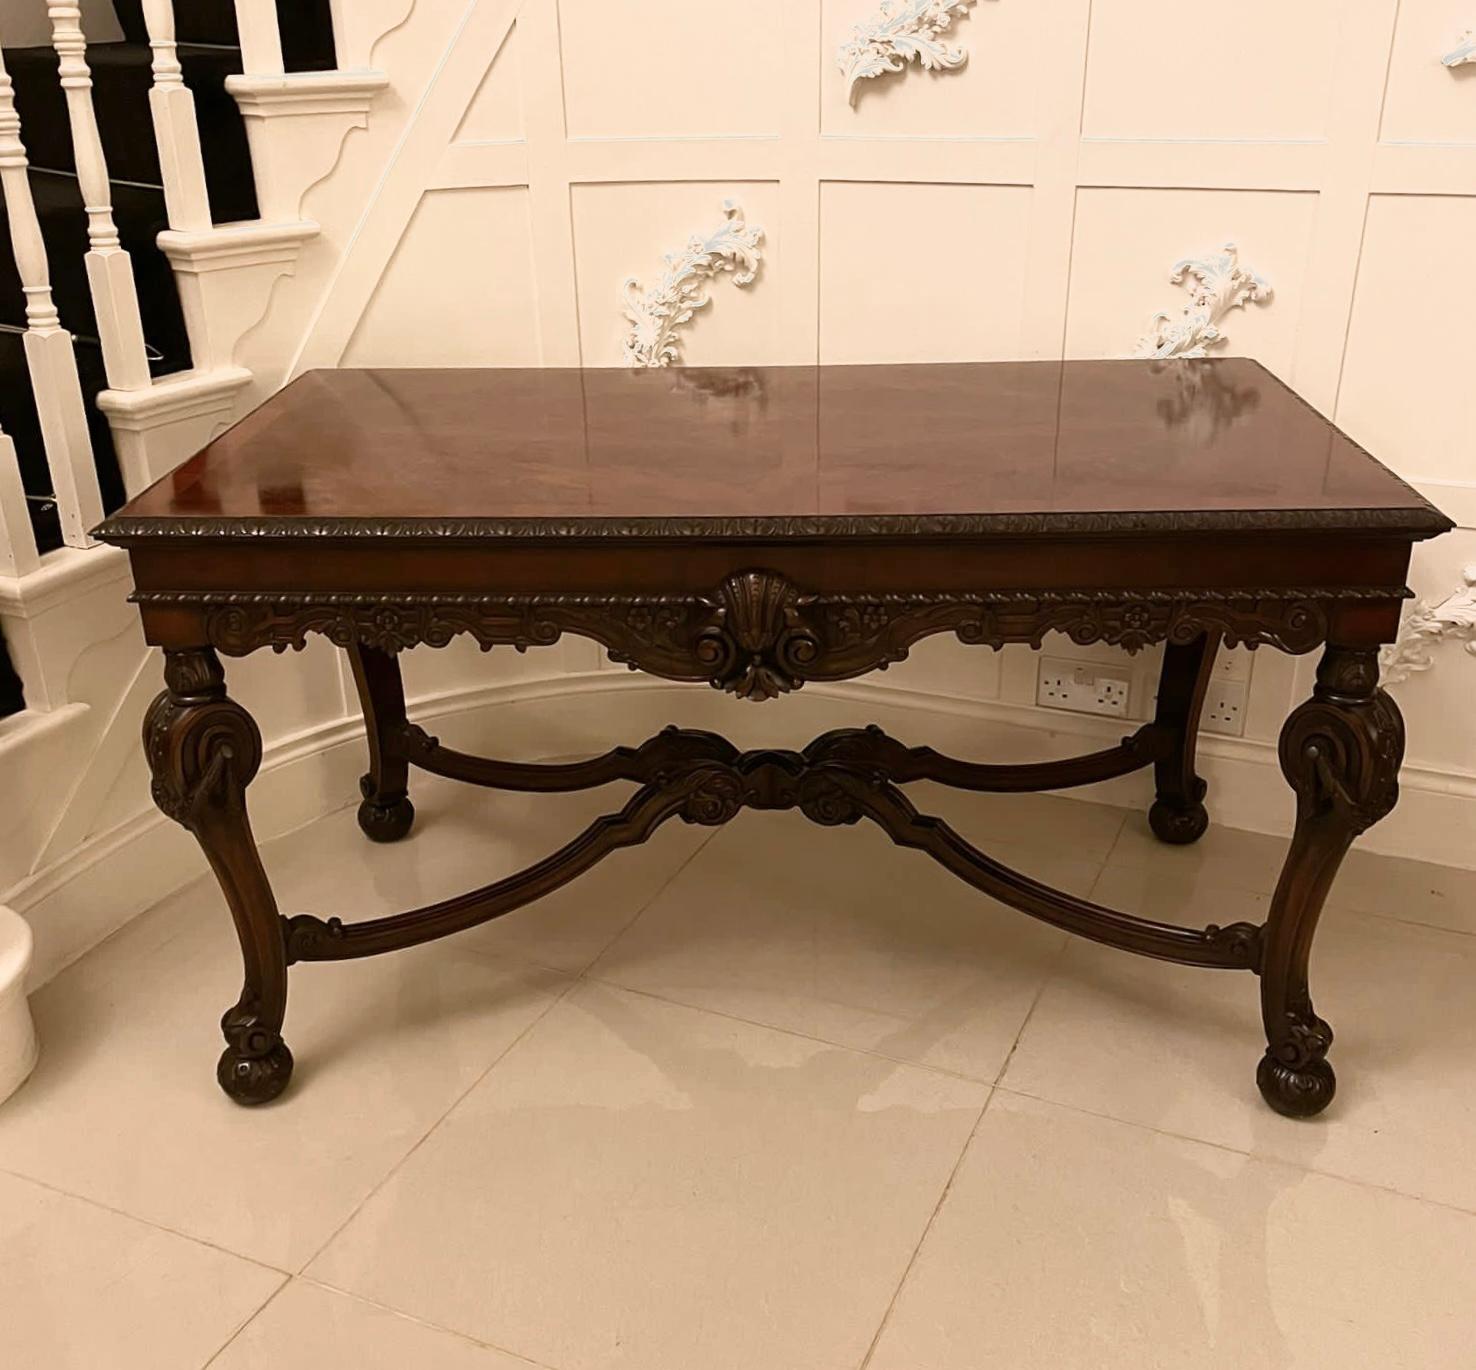 Outstanding Quality Antique Edwardian Freestanding Carved Mahogany Centre Table For Sale 1